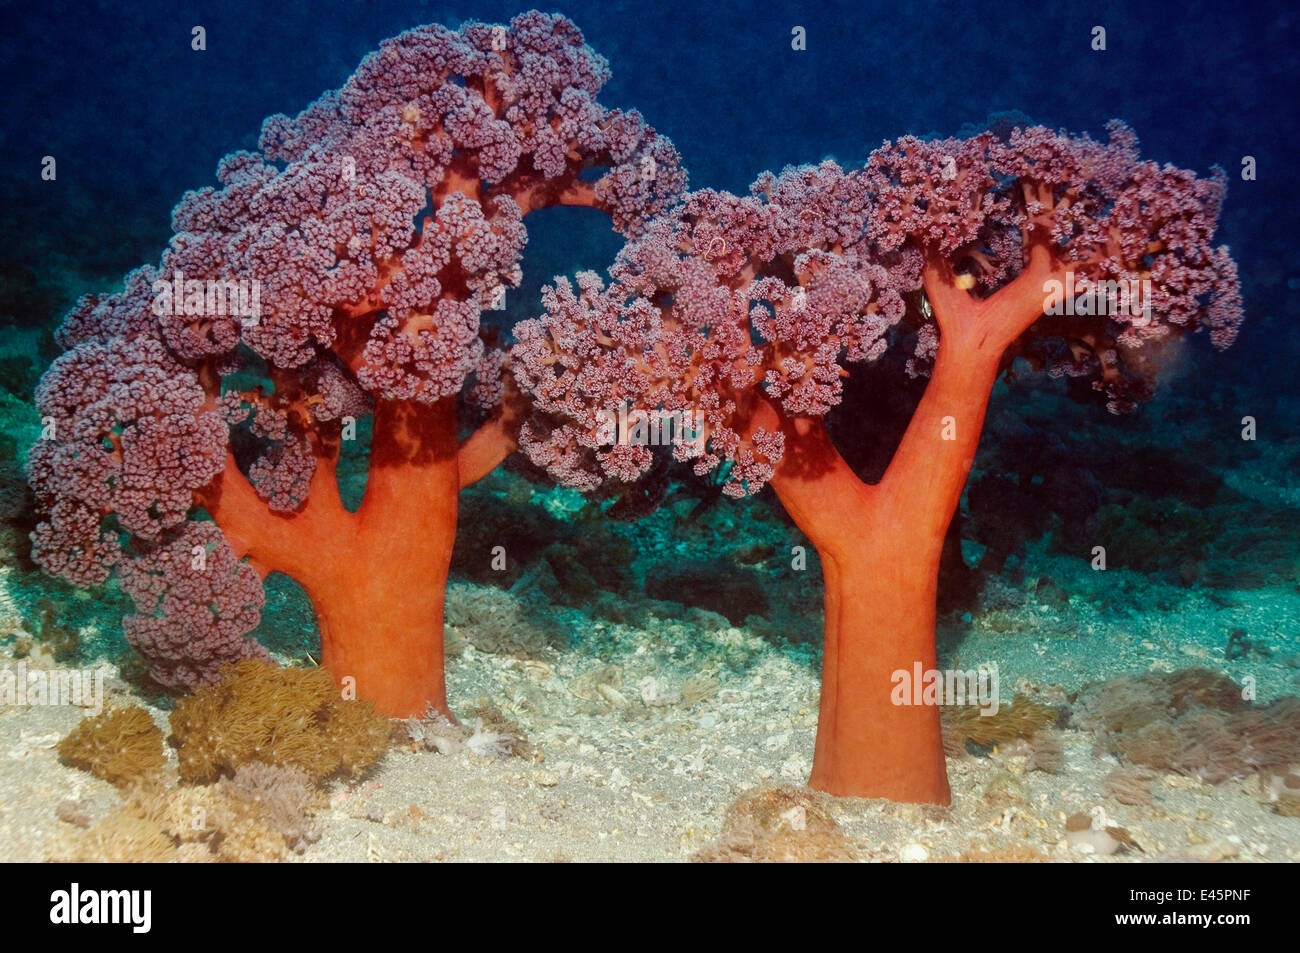 Tree coral (Dendronephthya sp) on sandy sea bed. Rinca, Komodo National Park, Indonesia Stock Photo